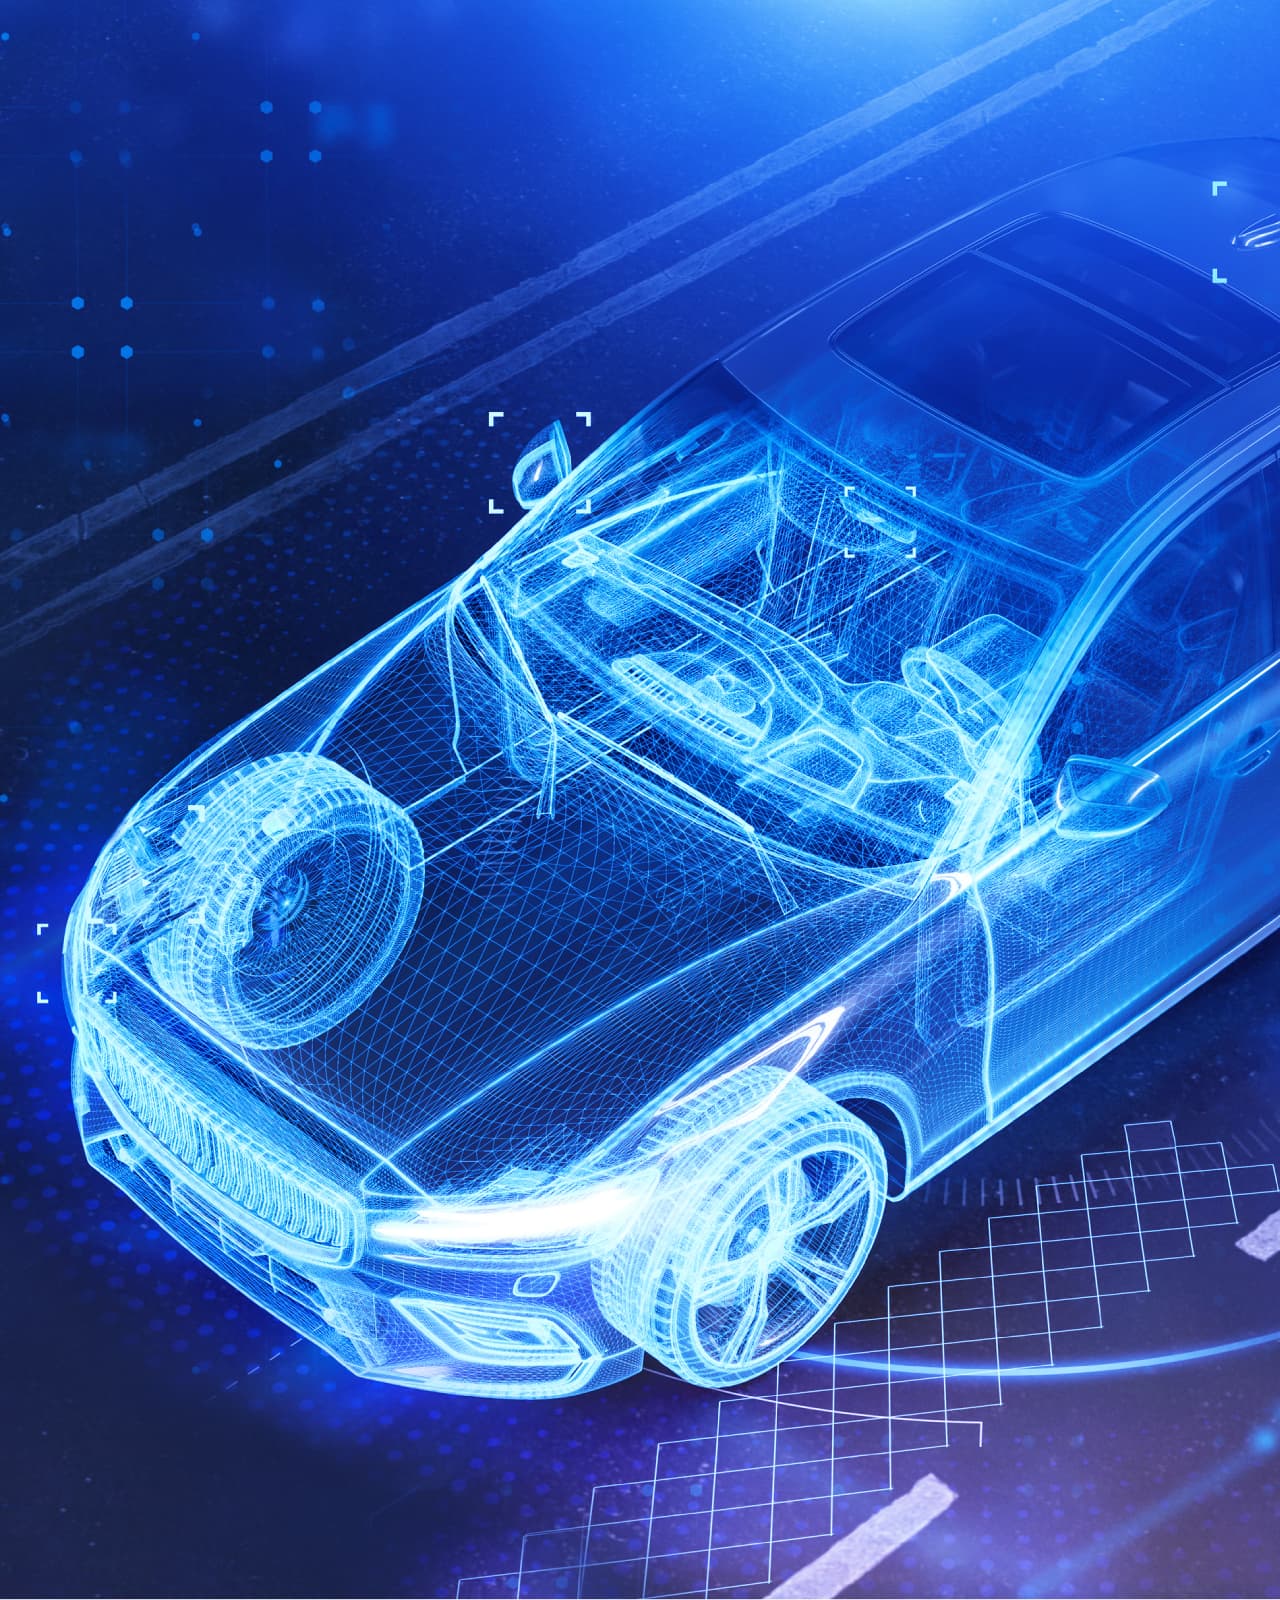 Automotive engineers use MATLAB, Simulink, Comsol Multiphysics, and Speedgoat